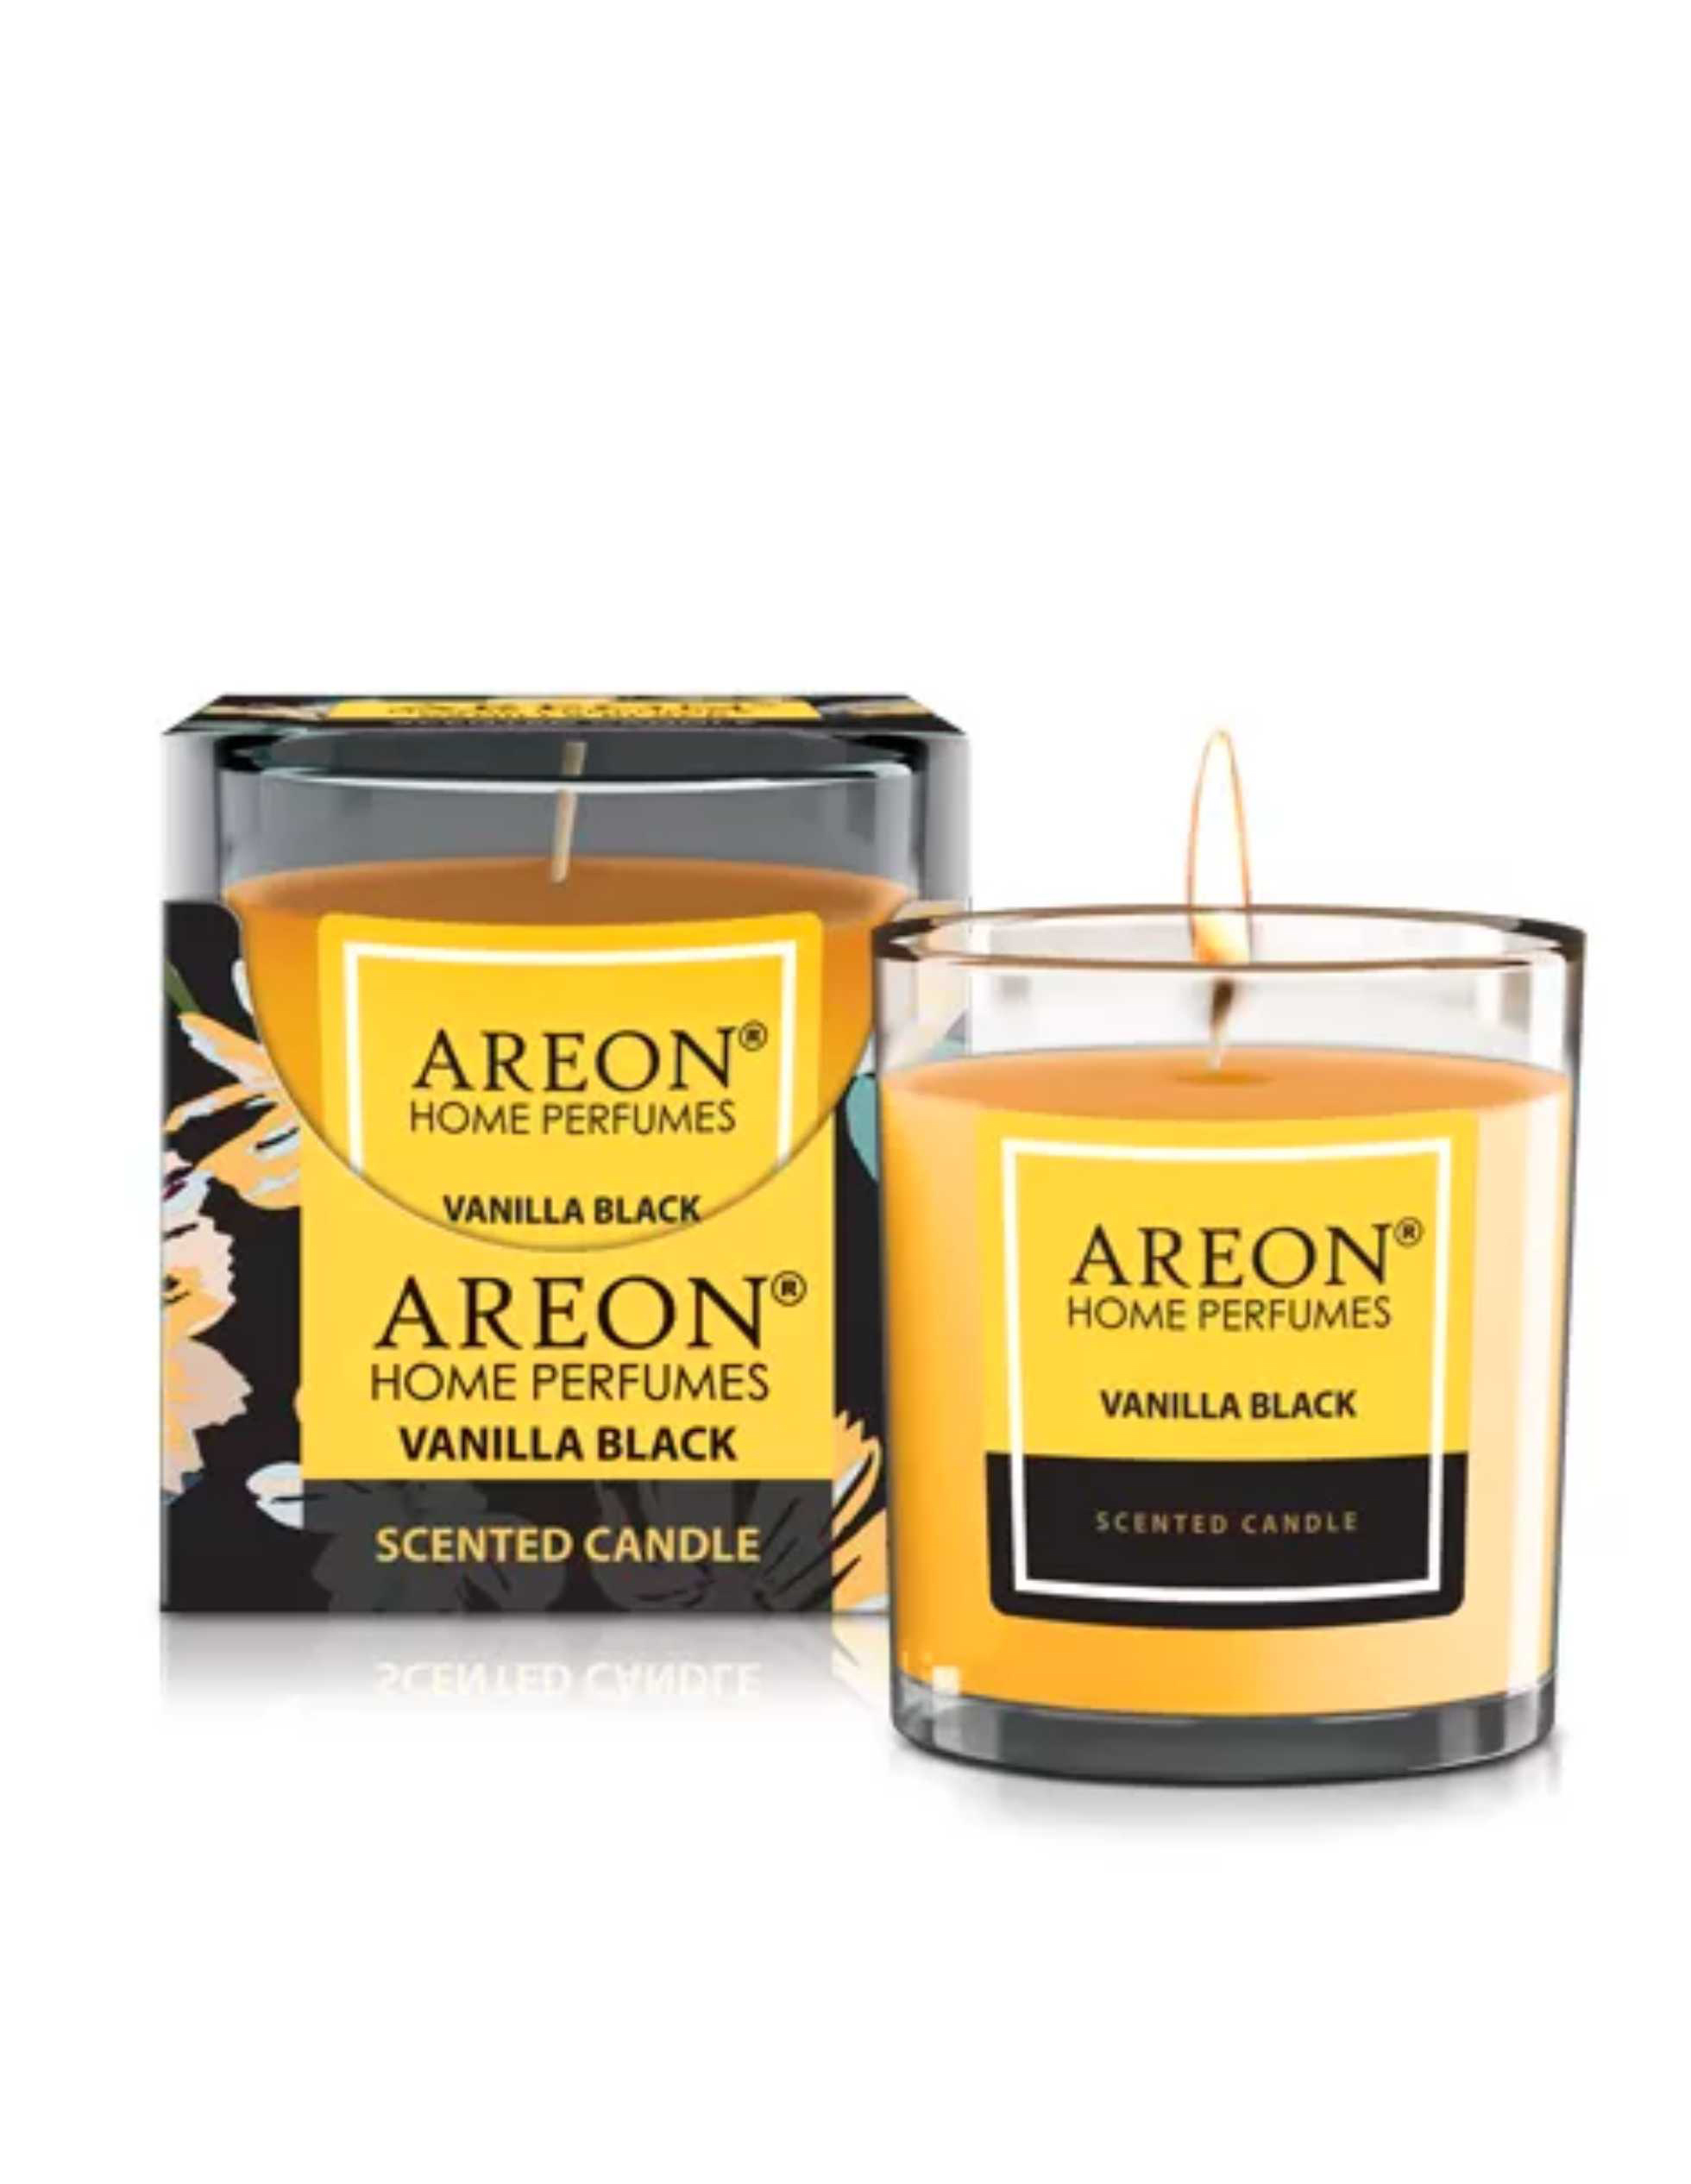 Areon Scented Candle Vanilla Black